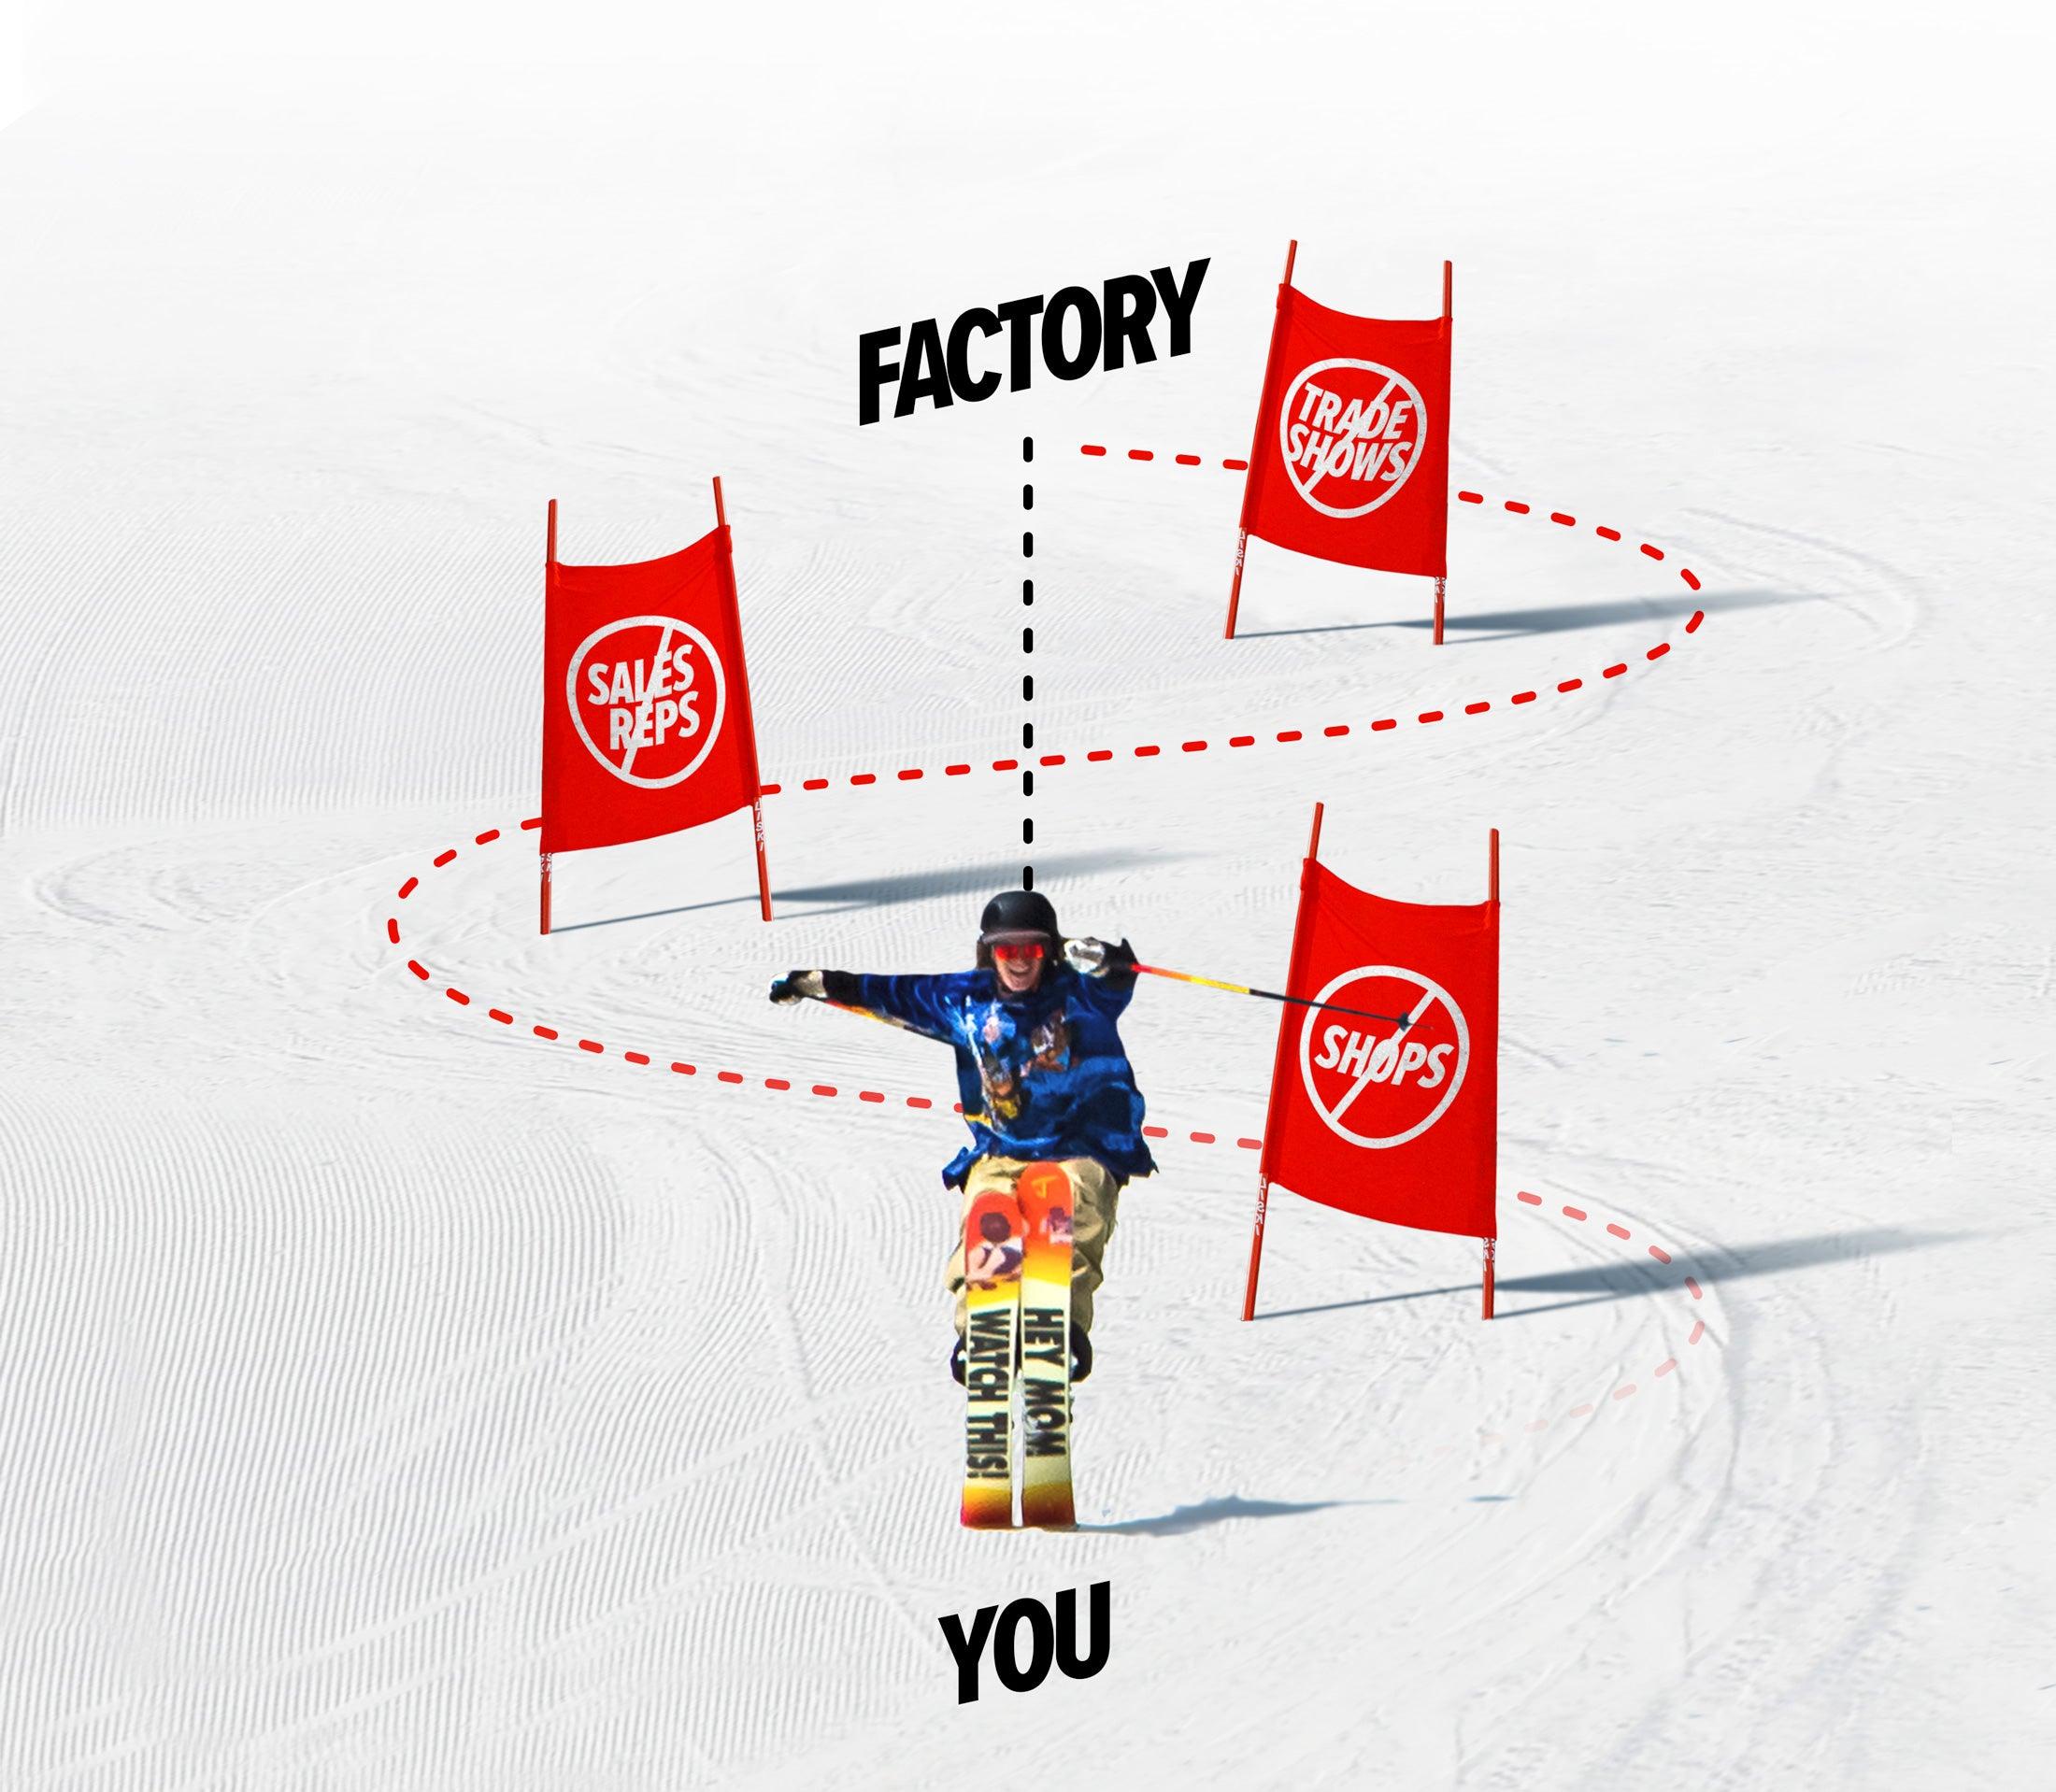 Factory Direct skis from jskis